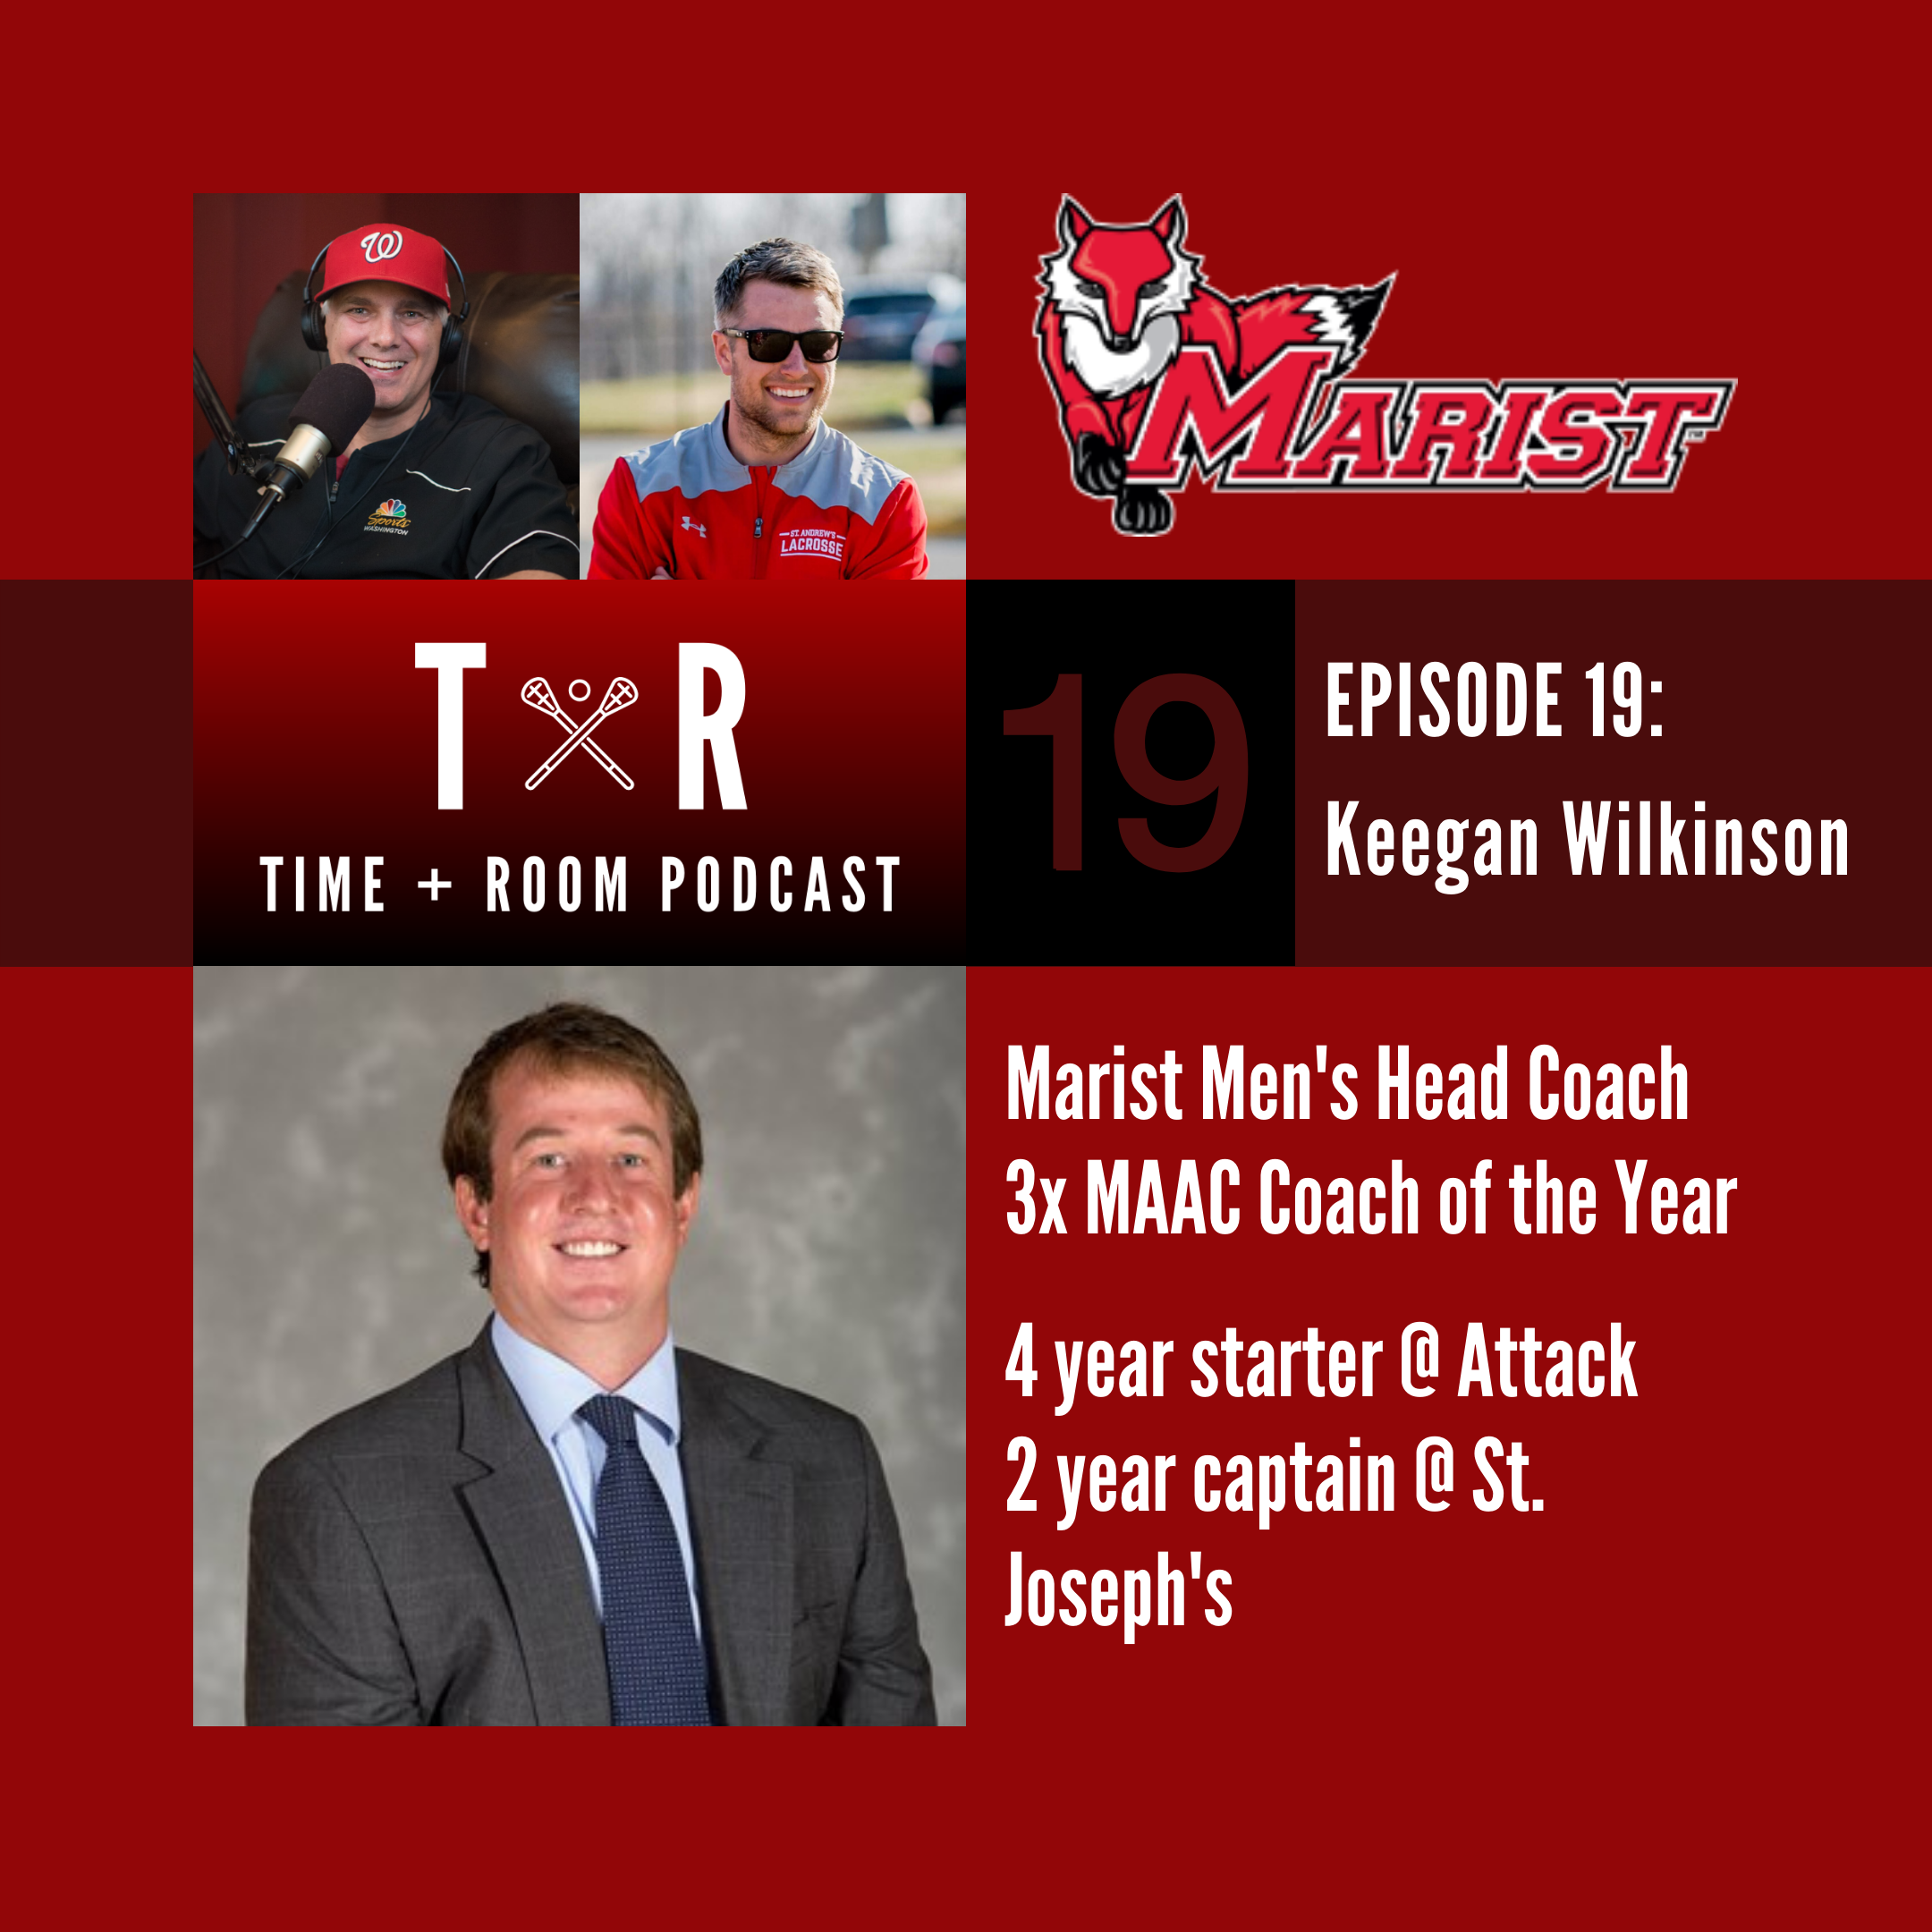 'Time and Room Podcast' with EB & Coach Dane Smith: Episode 19 - Keegan Wilkinson